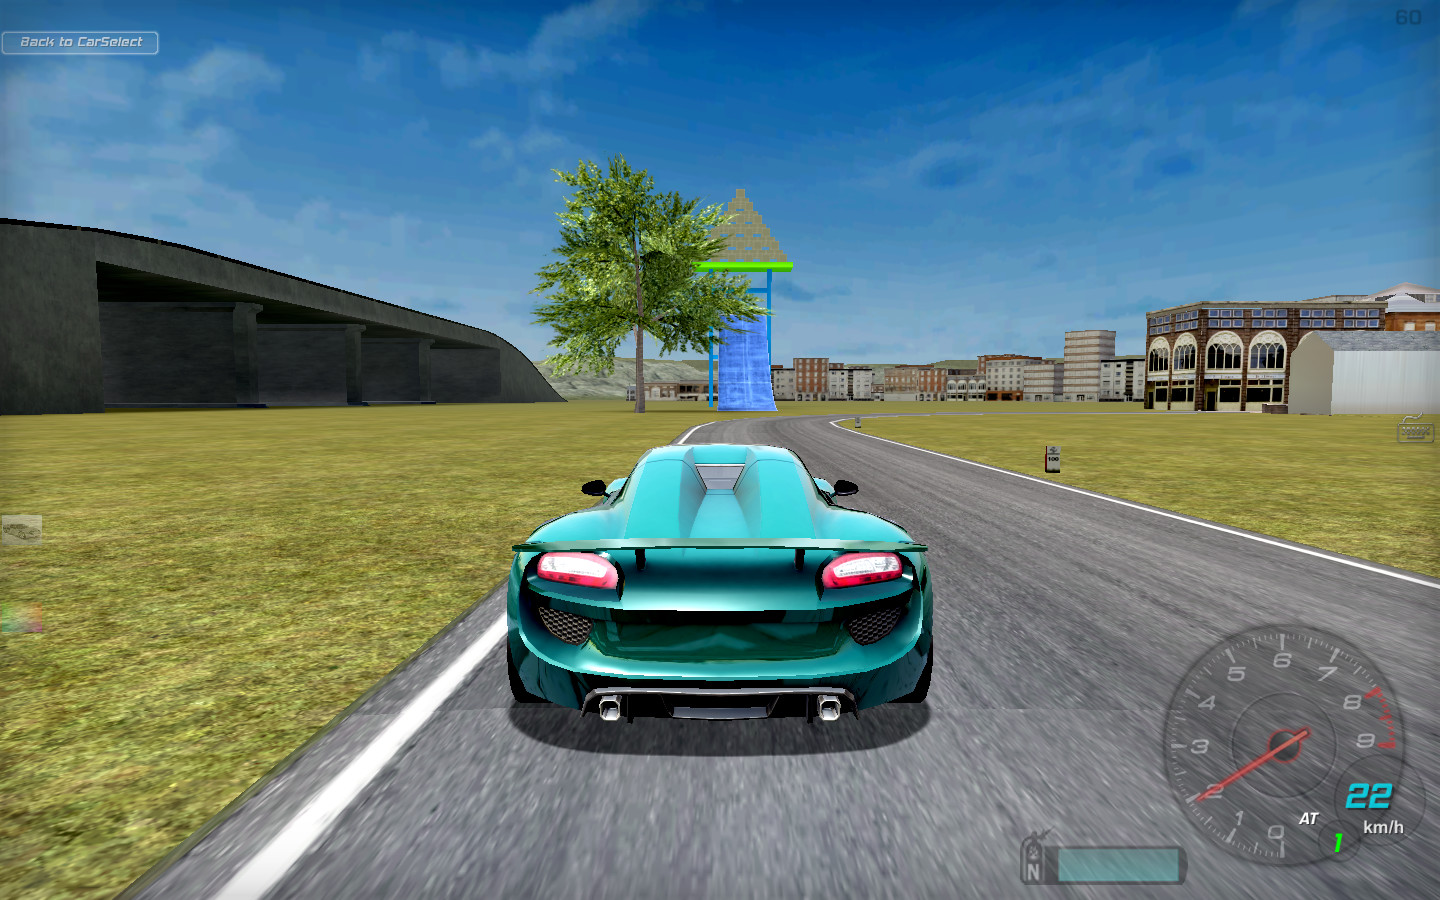 instal the new version for windows City Stunt Cars